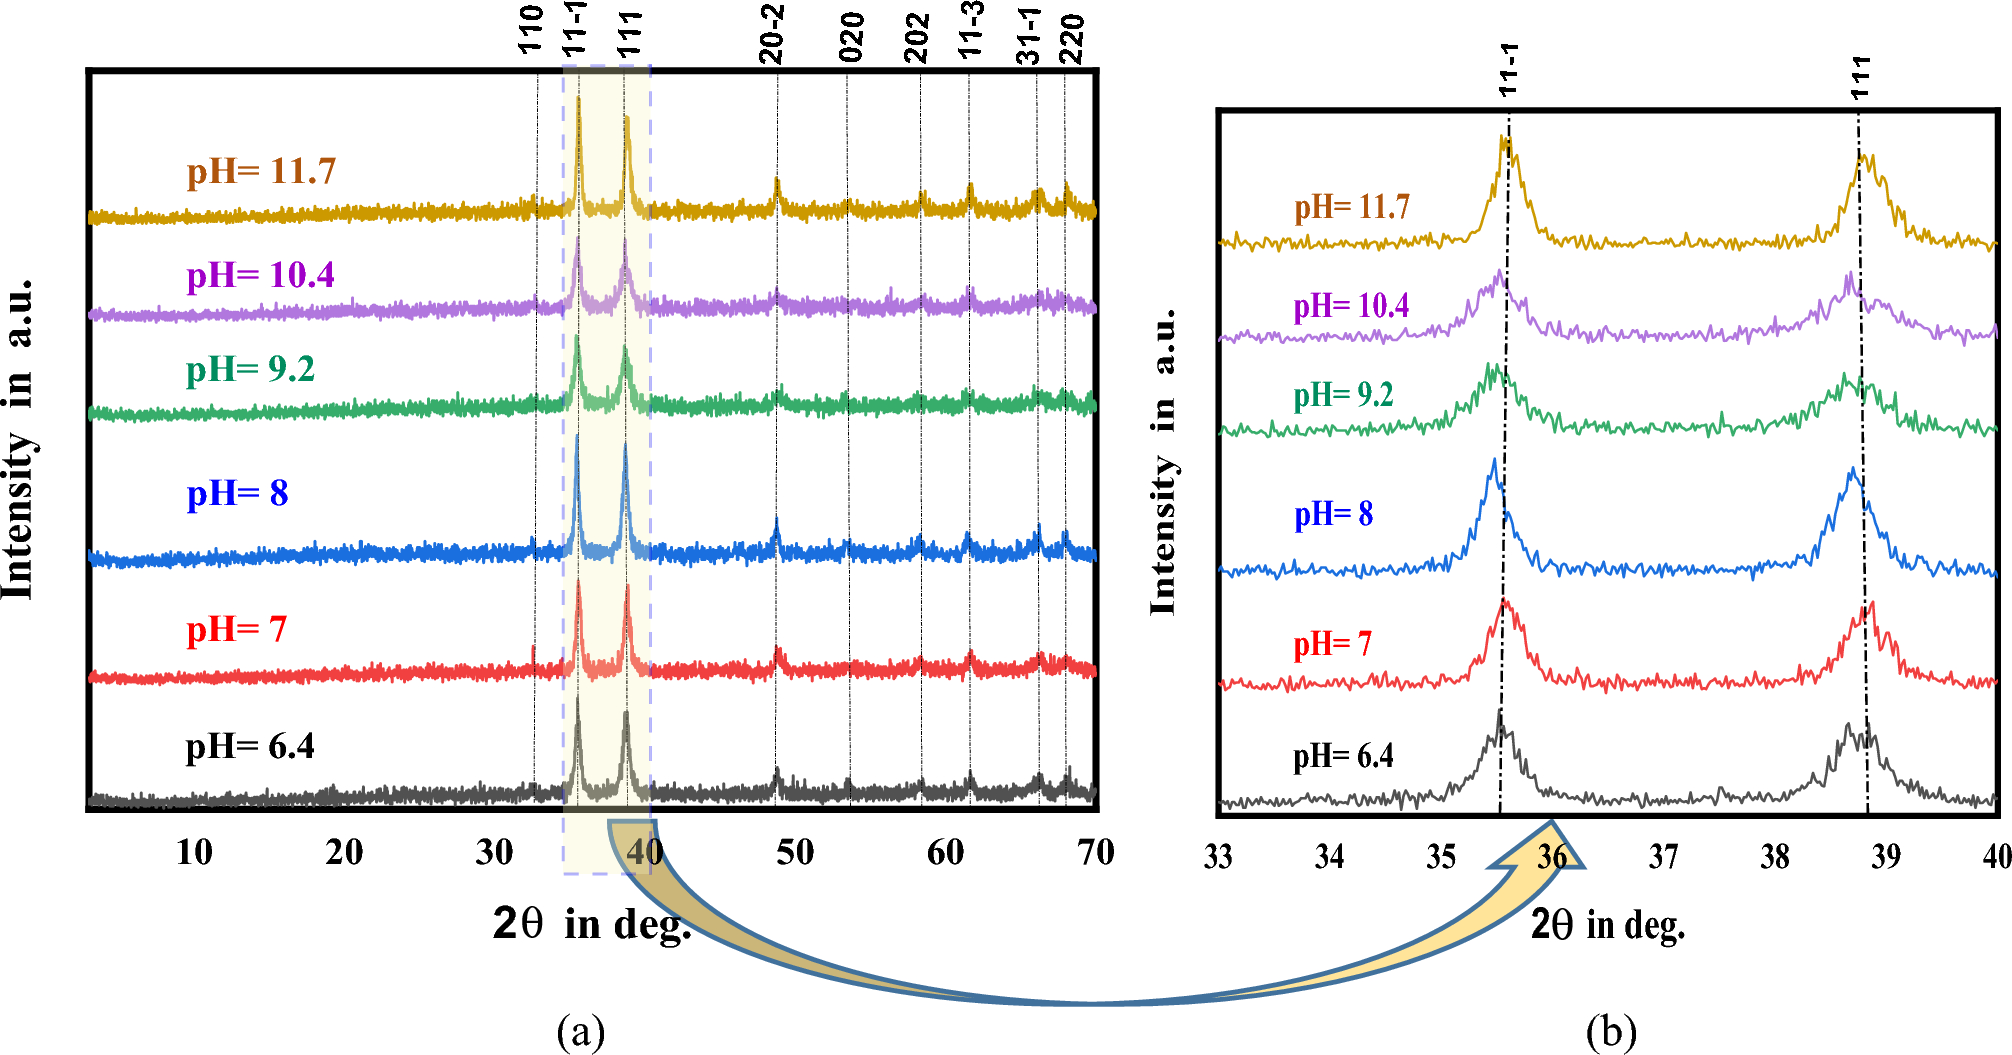 The study of copper oxide nanoparticles based on the pH varying during propolis-mediated synthesis: structure, optical properties, UV-block ability, and malachite green photodegradation